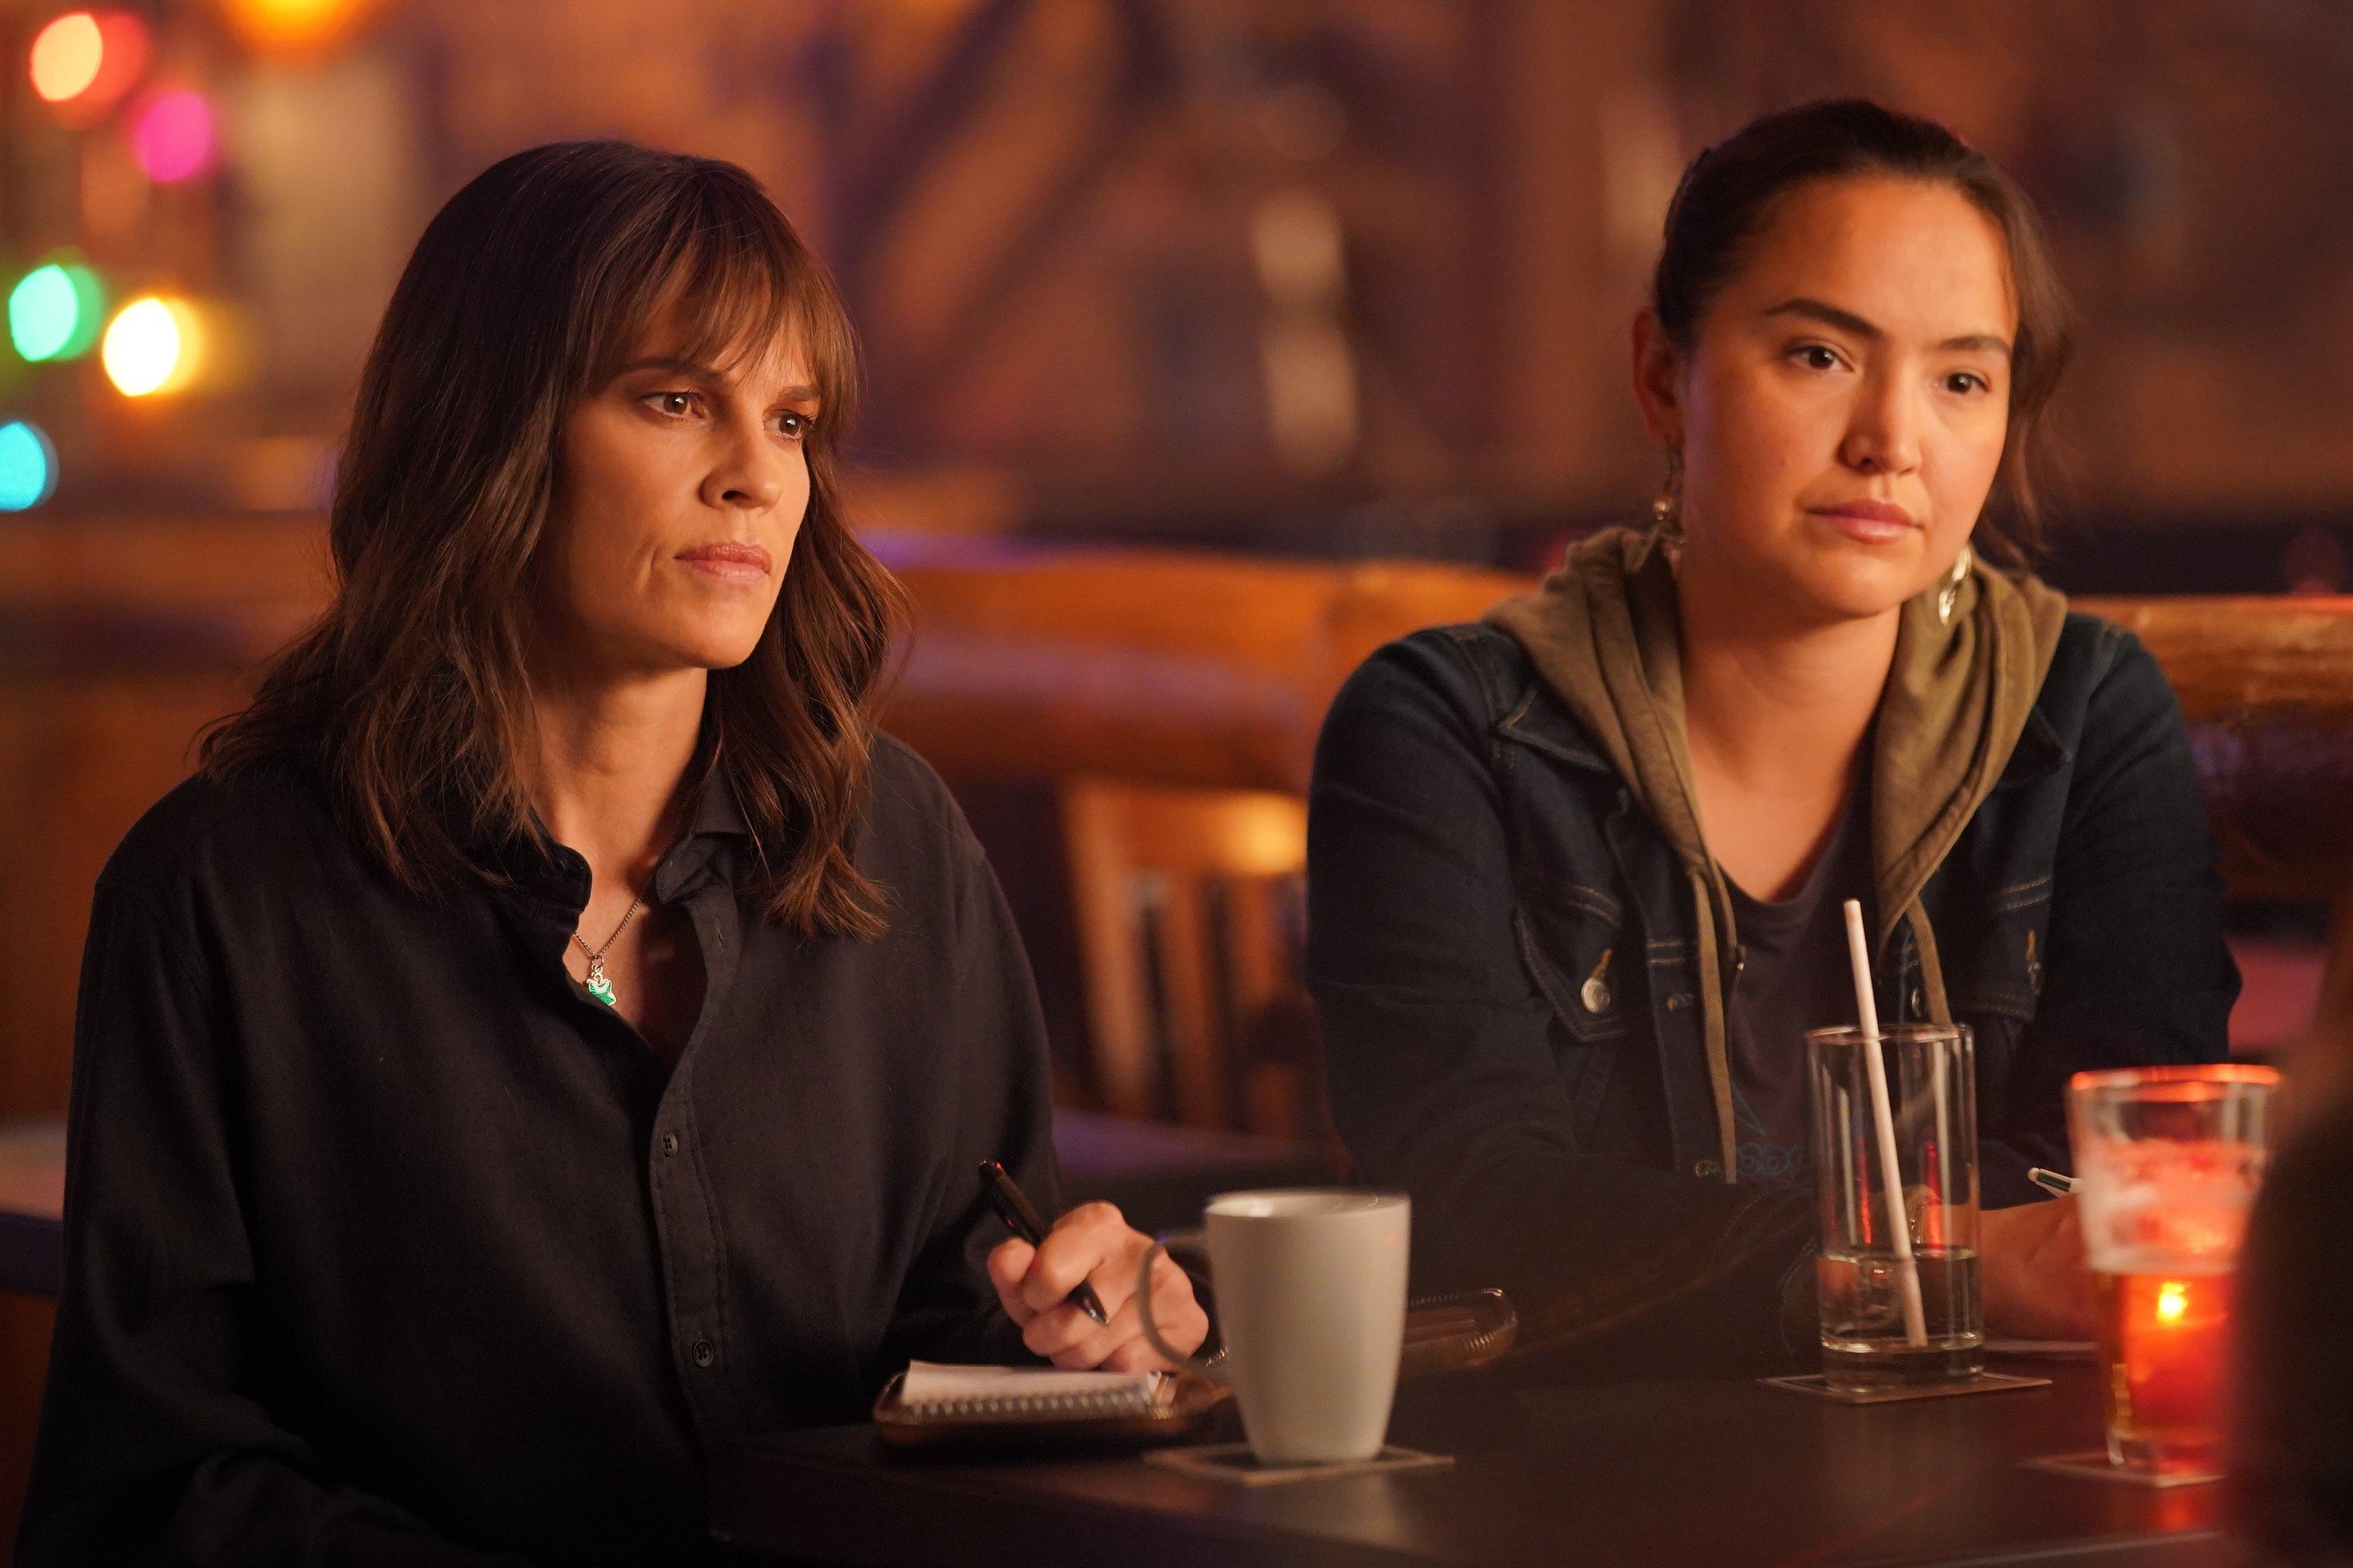 Hilary Swank and Grace Dove, who star as Eileen Fitzgerald and Roz Friendly in episodes of 'Alaska Daily' Season 1, share a scene at a bar. Eileen wears a black button-up shirt. Roz wears a dark jean jacket over an olive green hoodie and dark gray shirt.